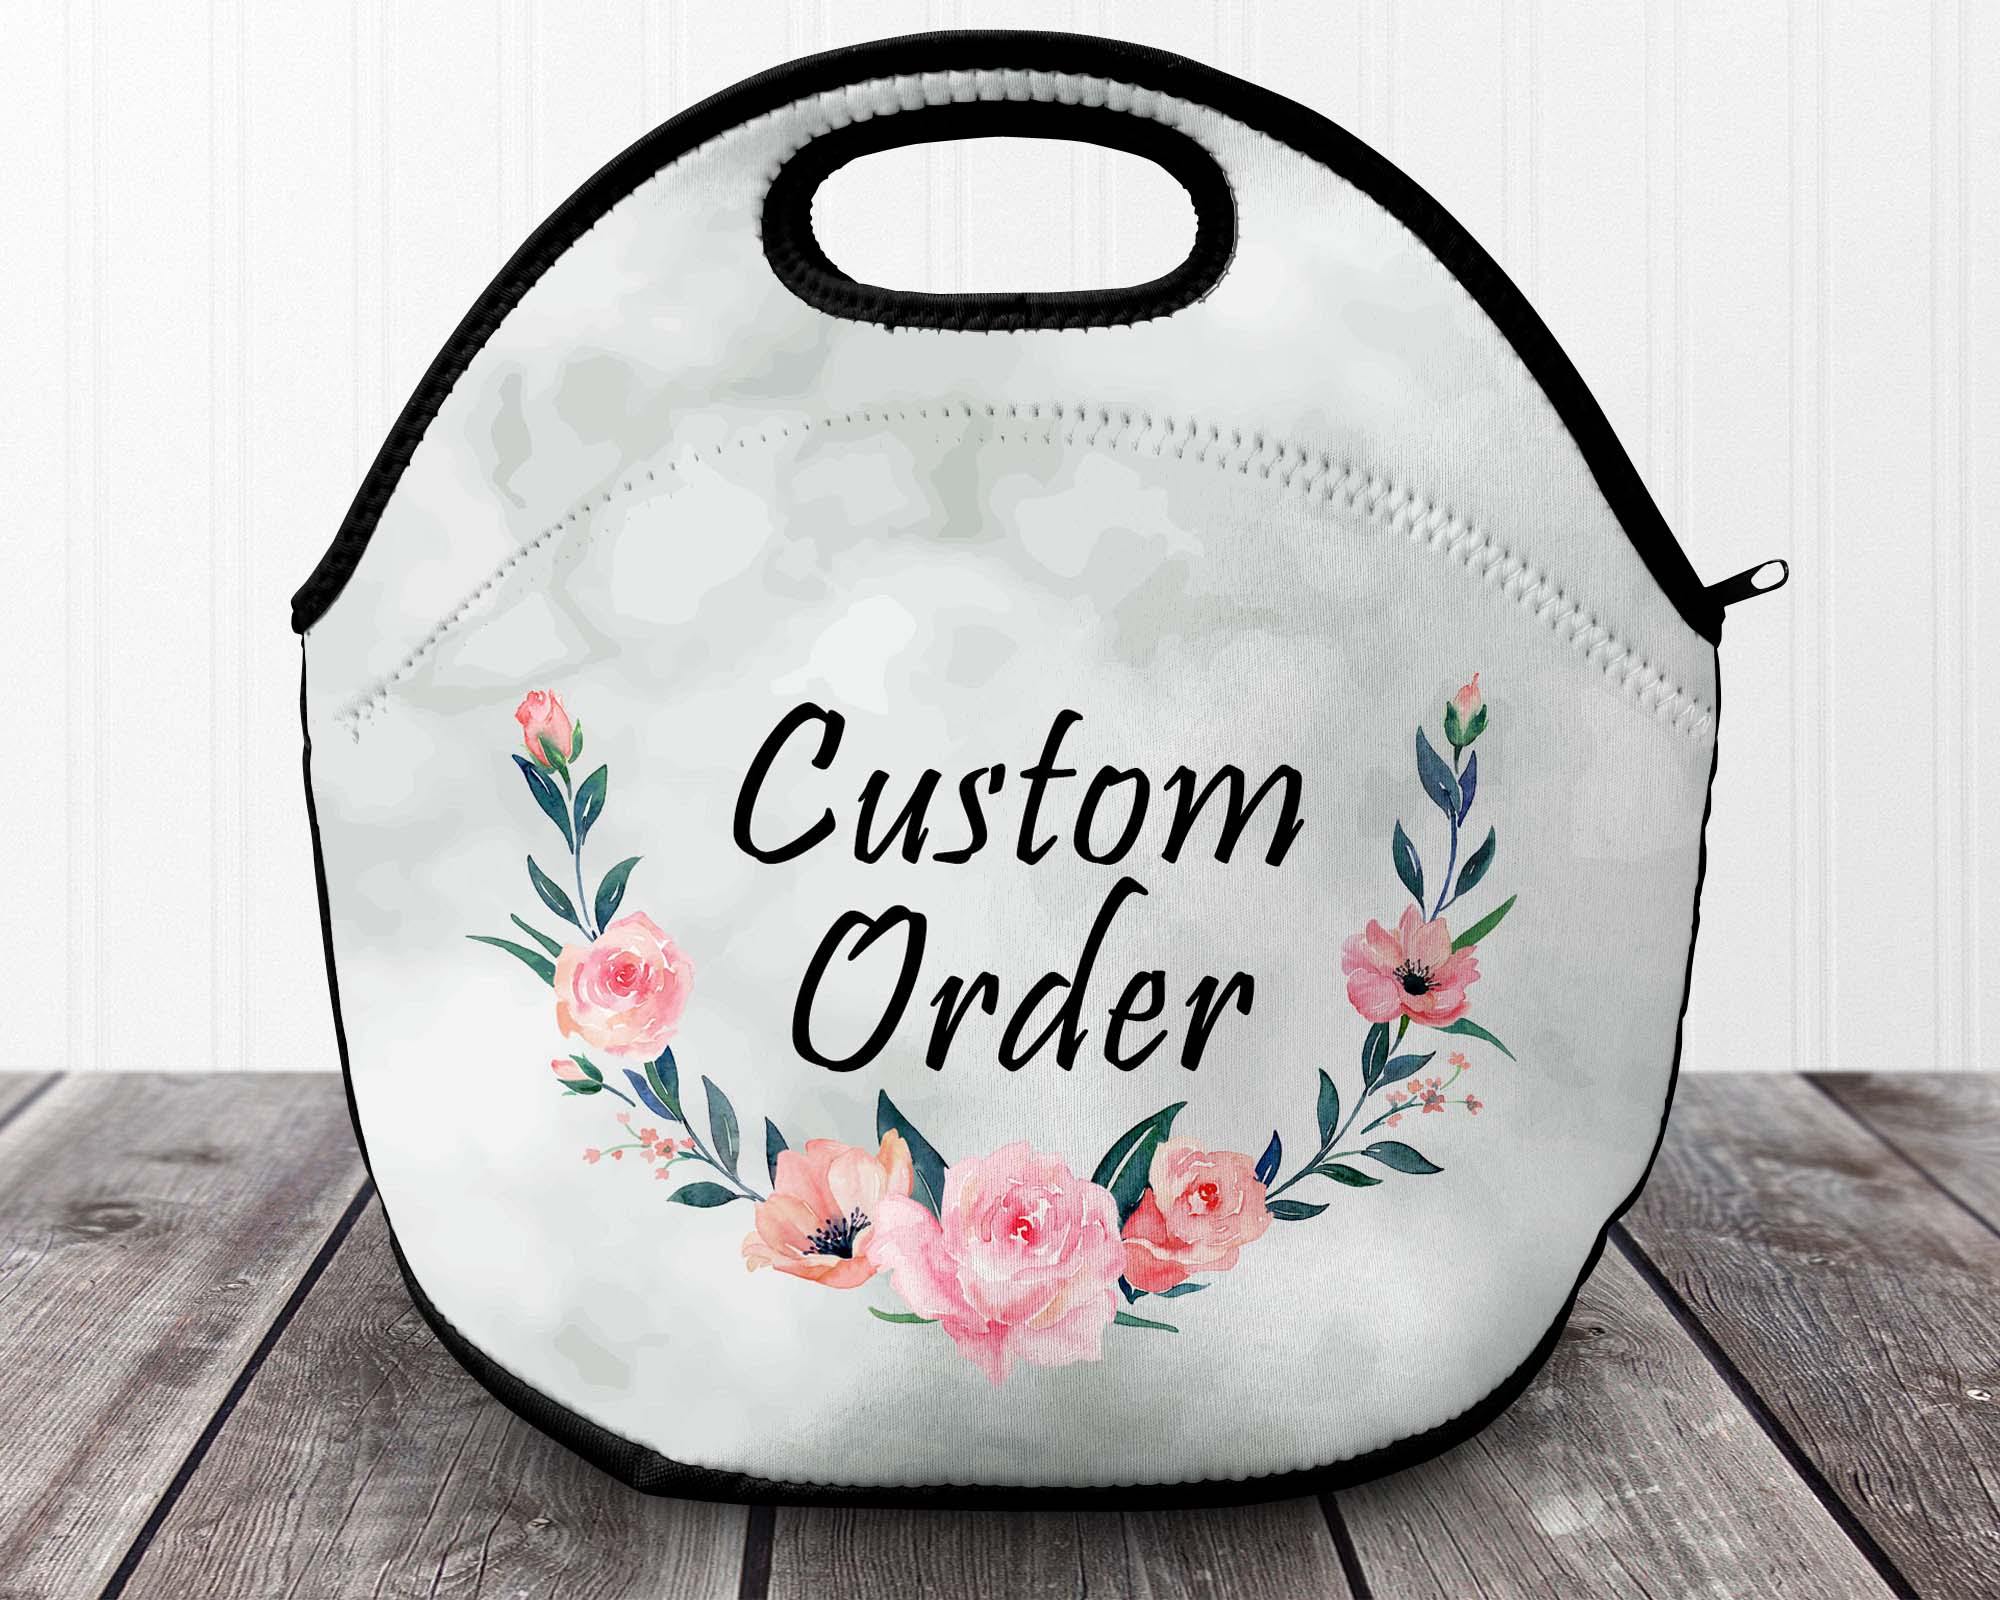 Lunch Bags - This & That Solutions - Personalized Gifts & Custom Home Decor